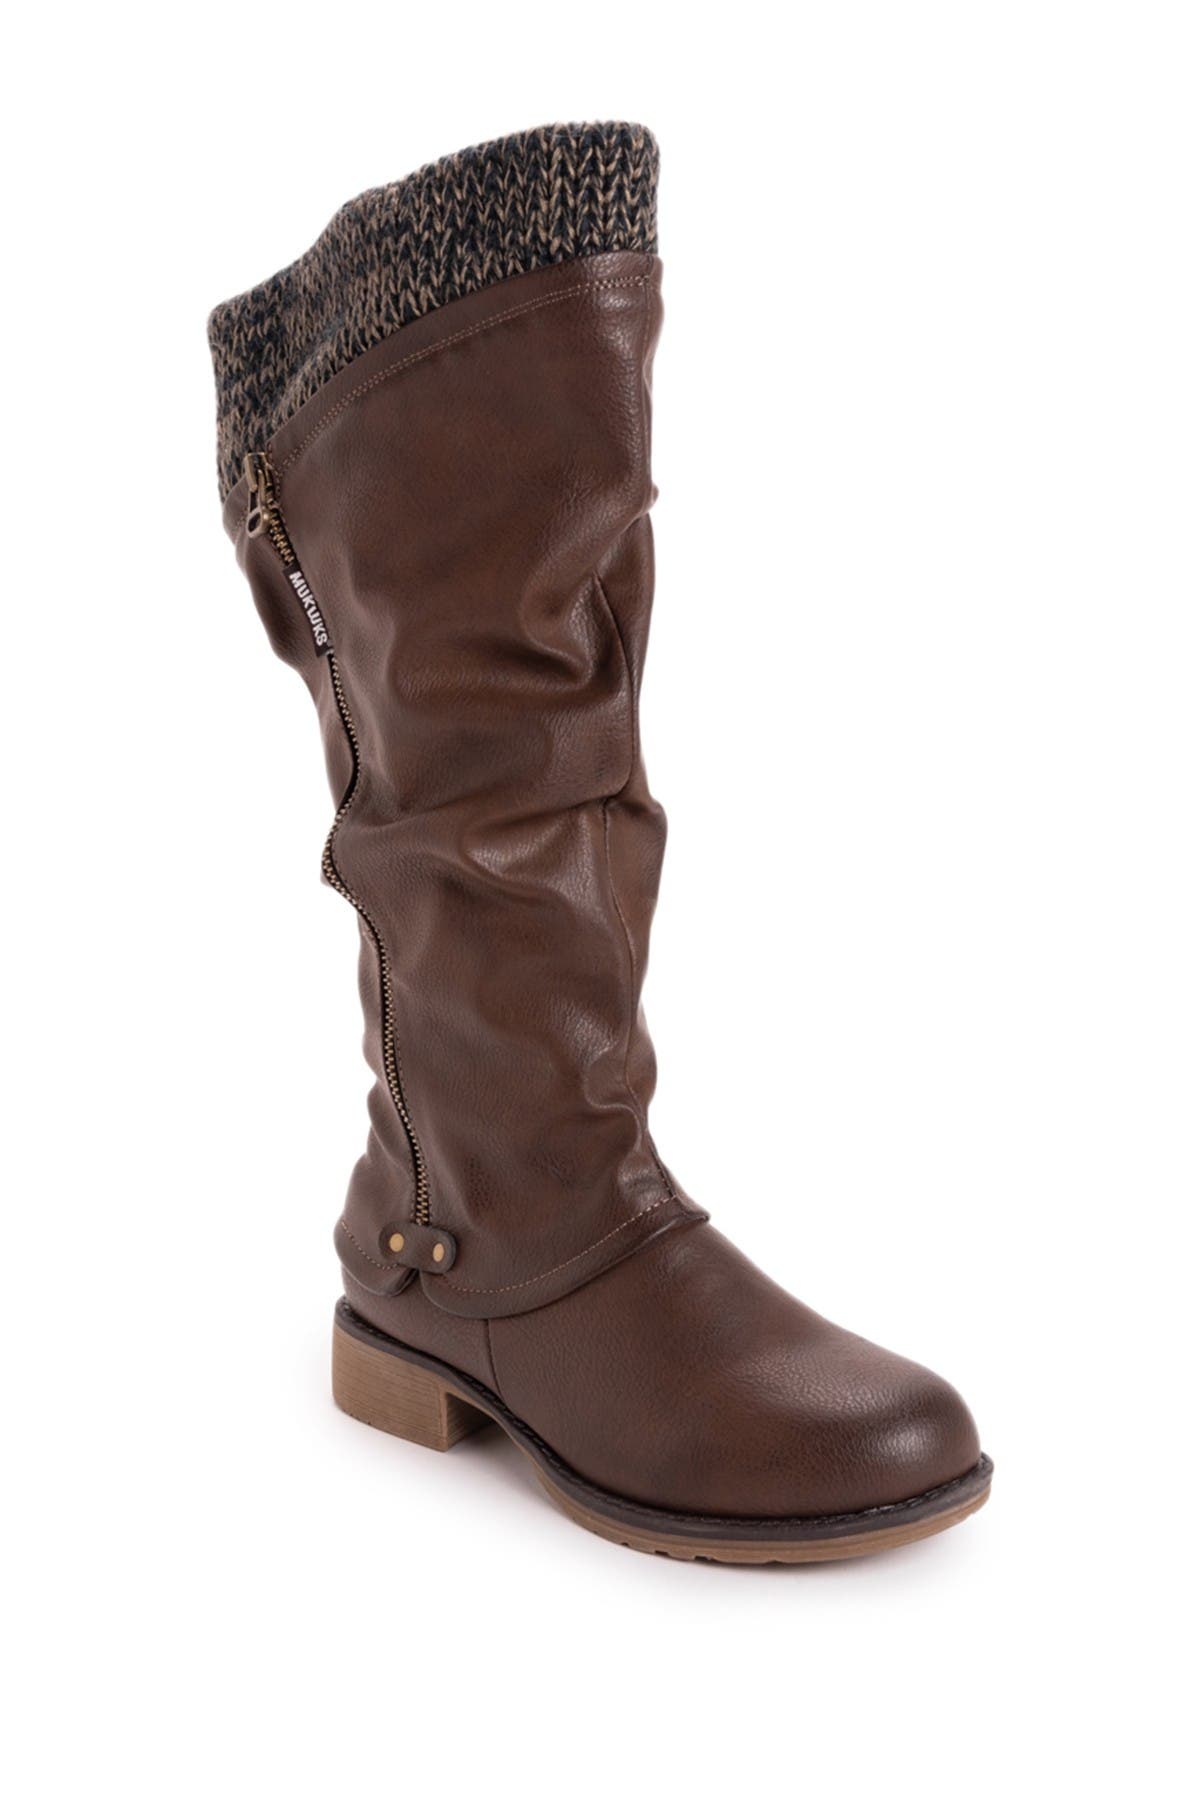 mux lux boots